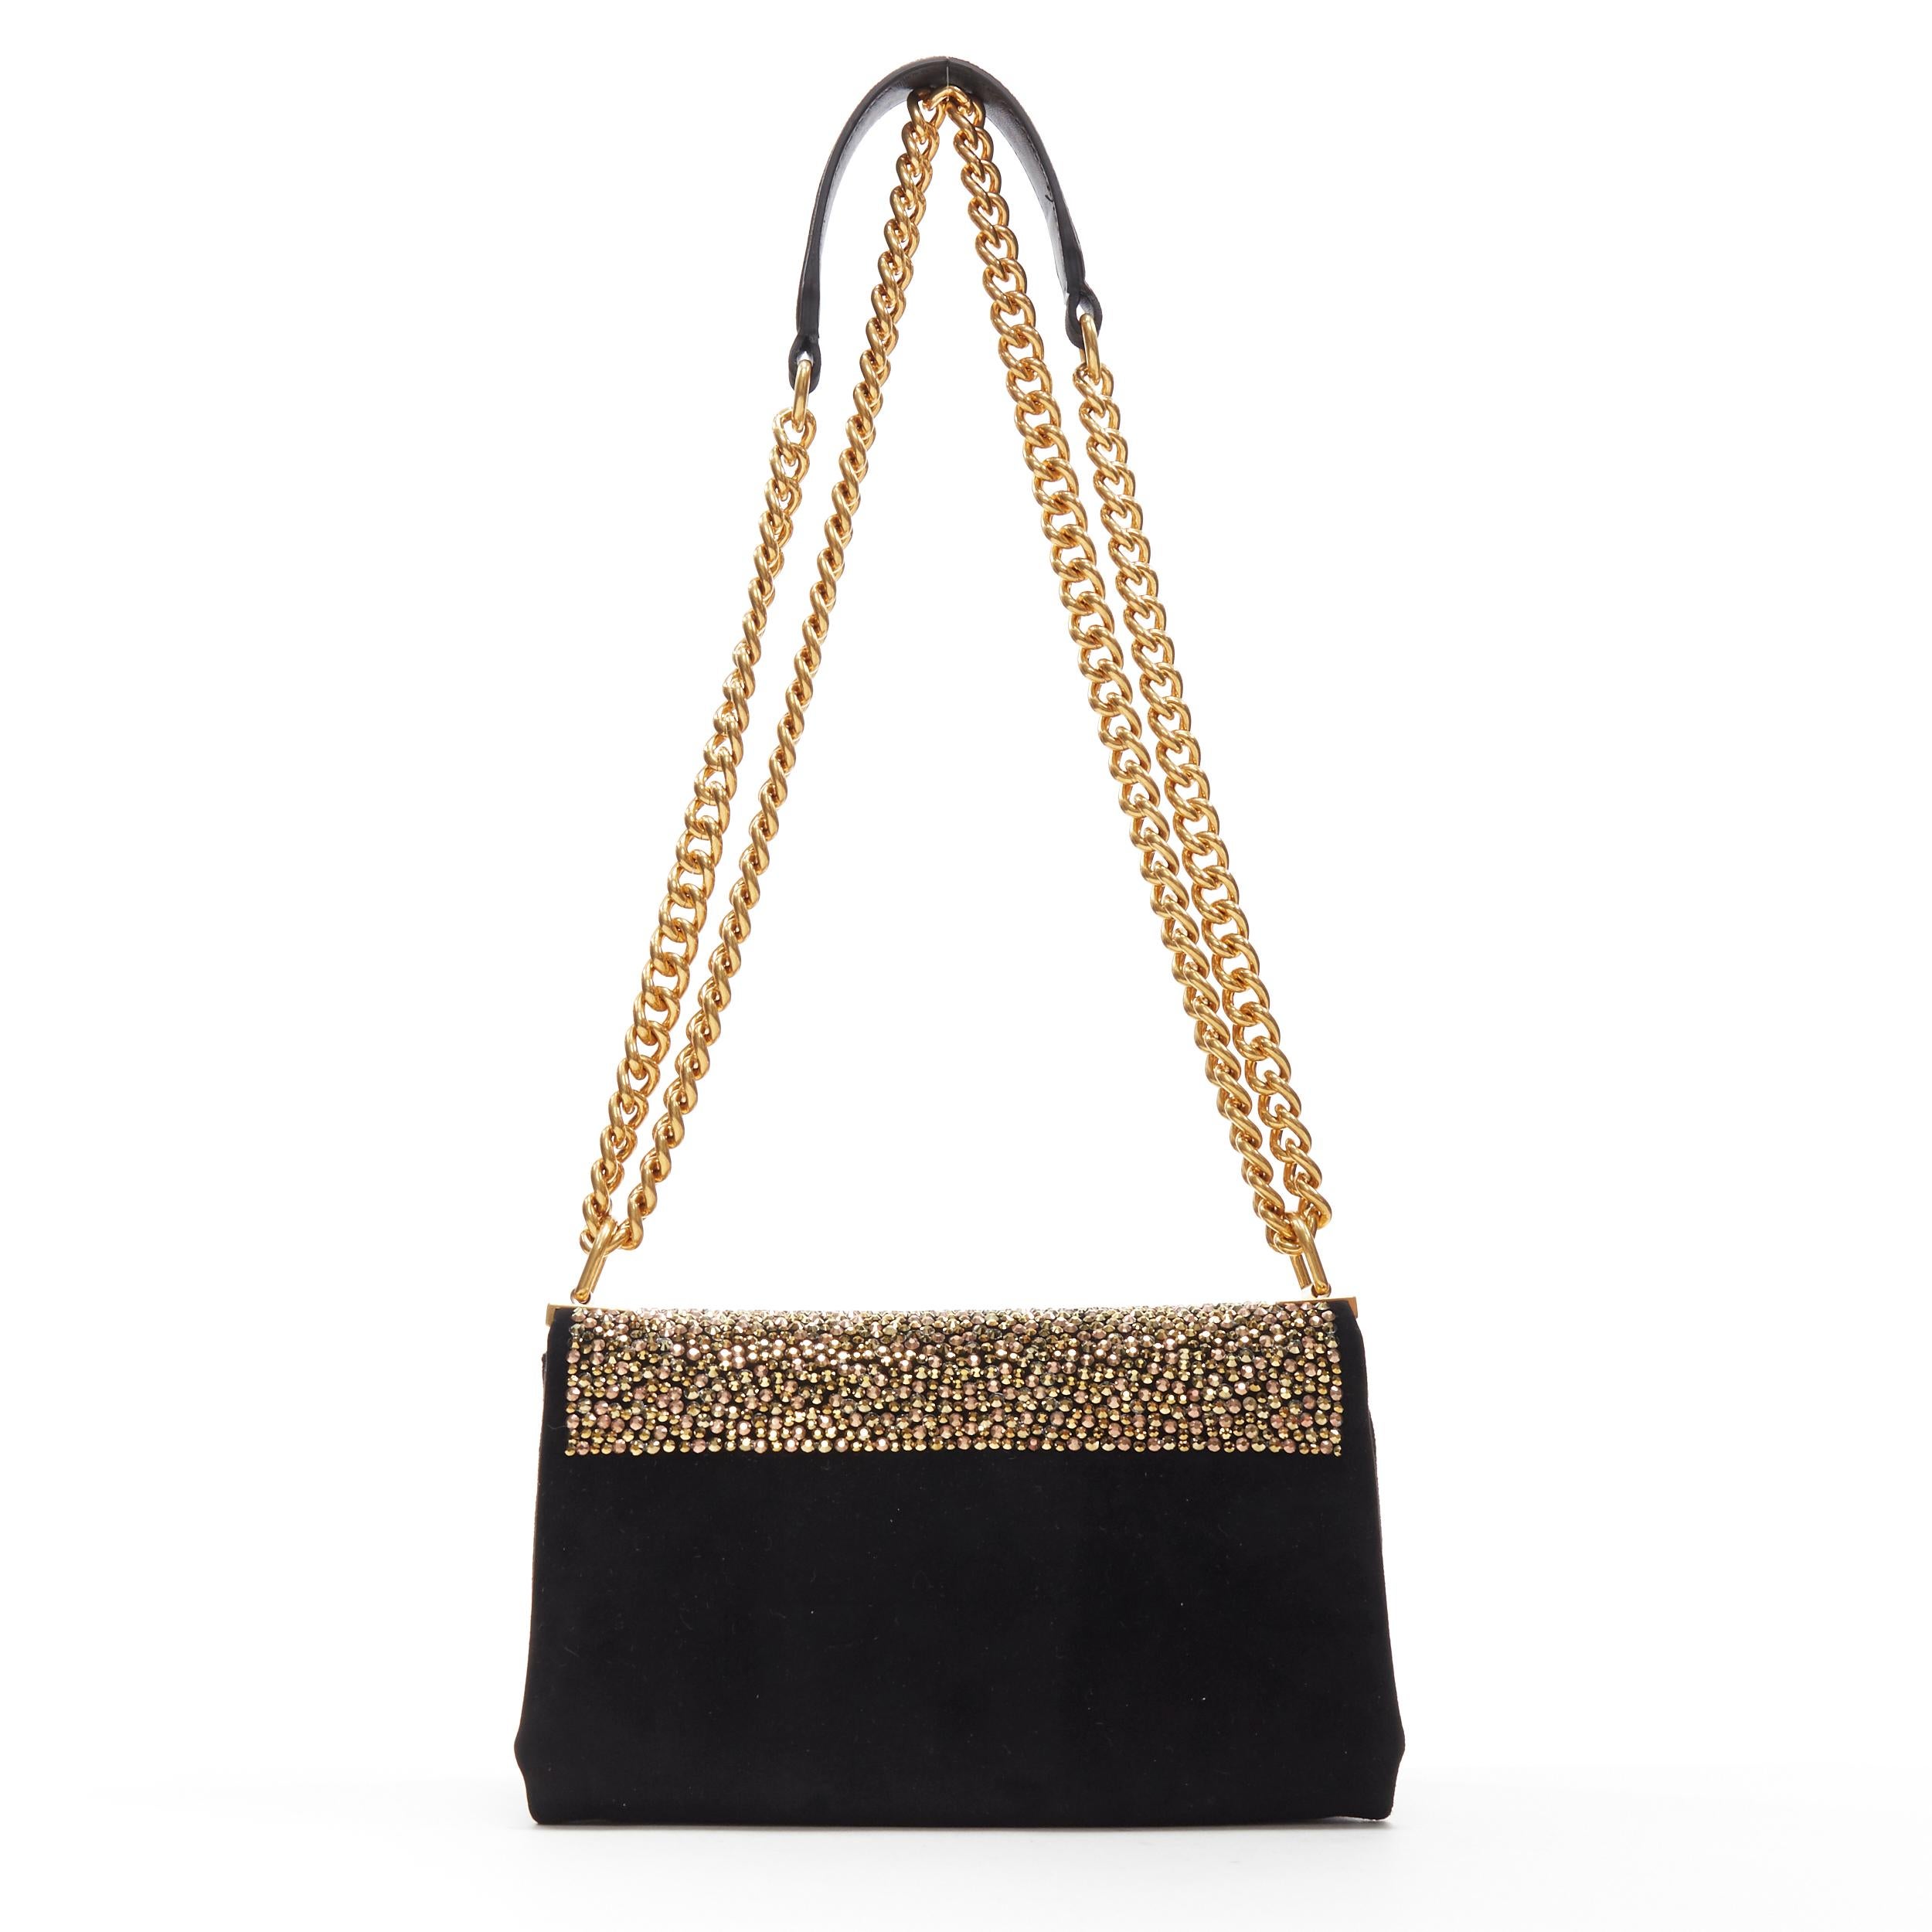 Brown new VERSACE Palazzo Medusa gold strass crystal black suede chain shoulder bag